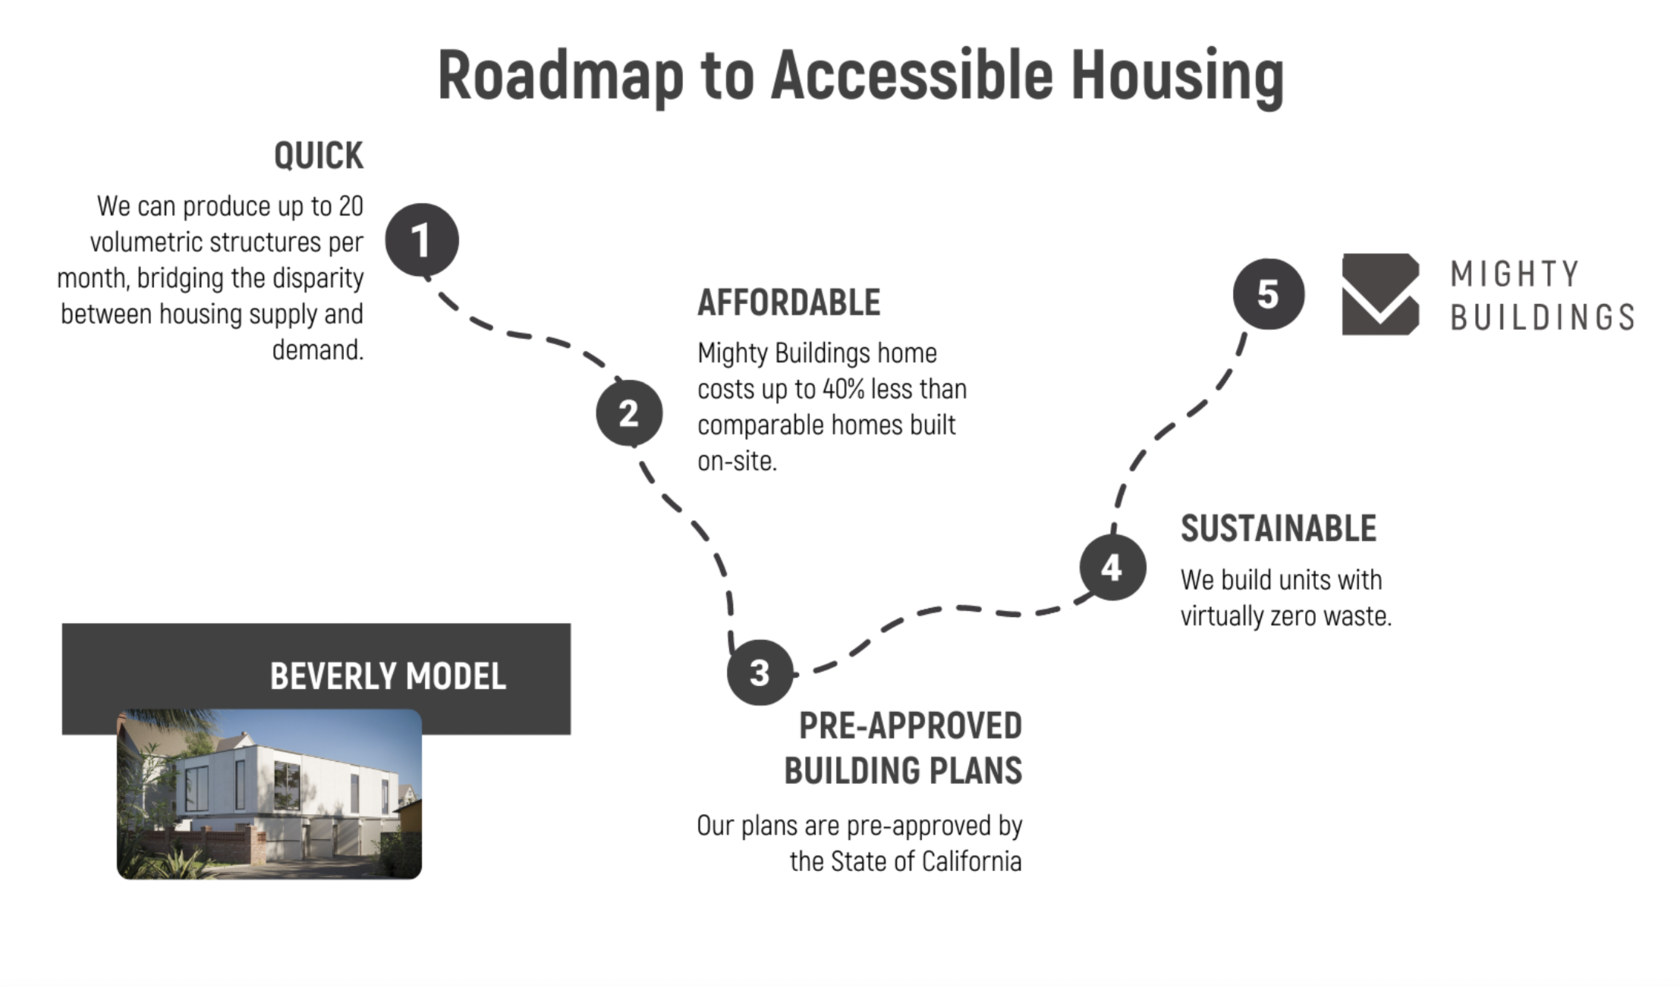 Roadmap to Accessible Housing